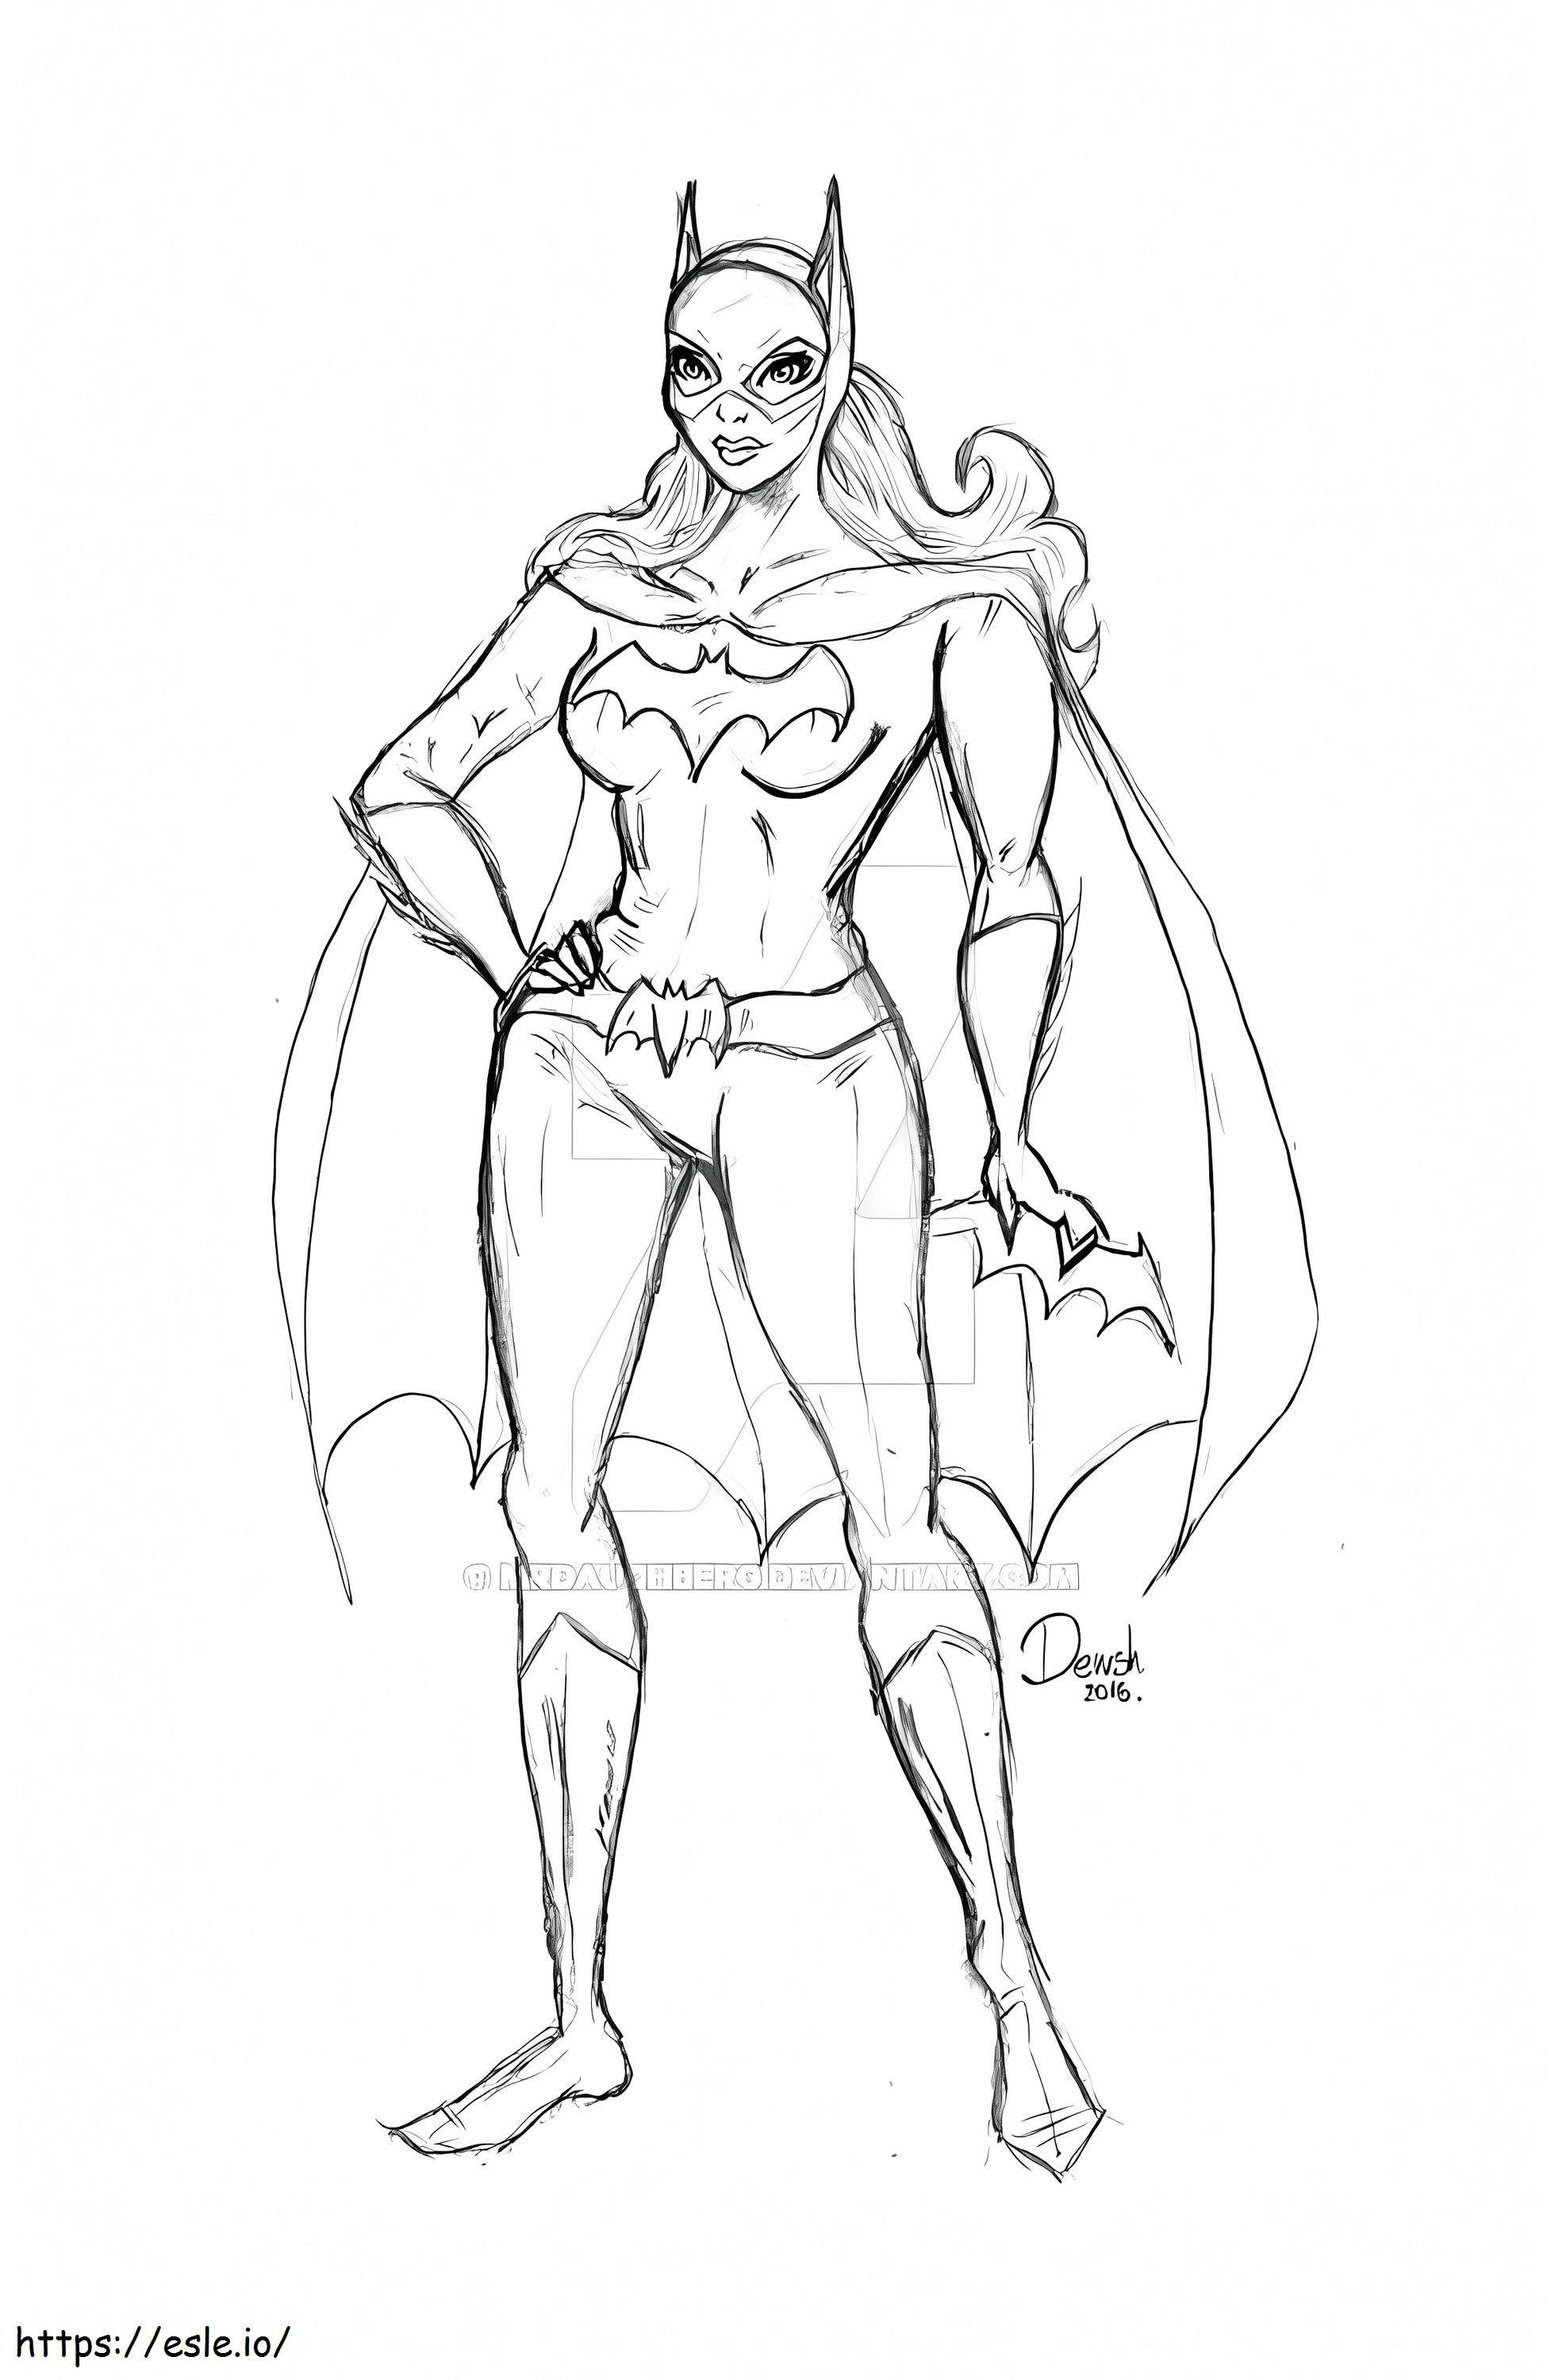 Awesome Batgirl coloring page